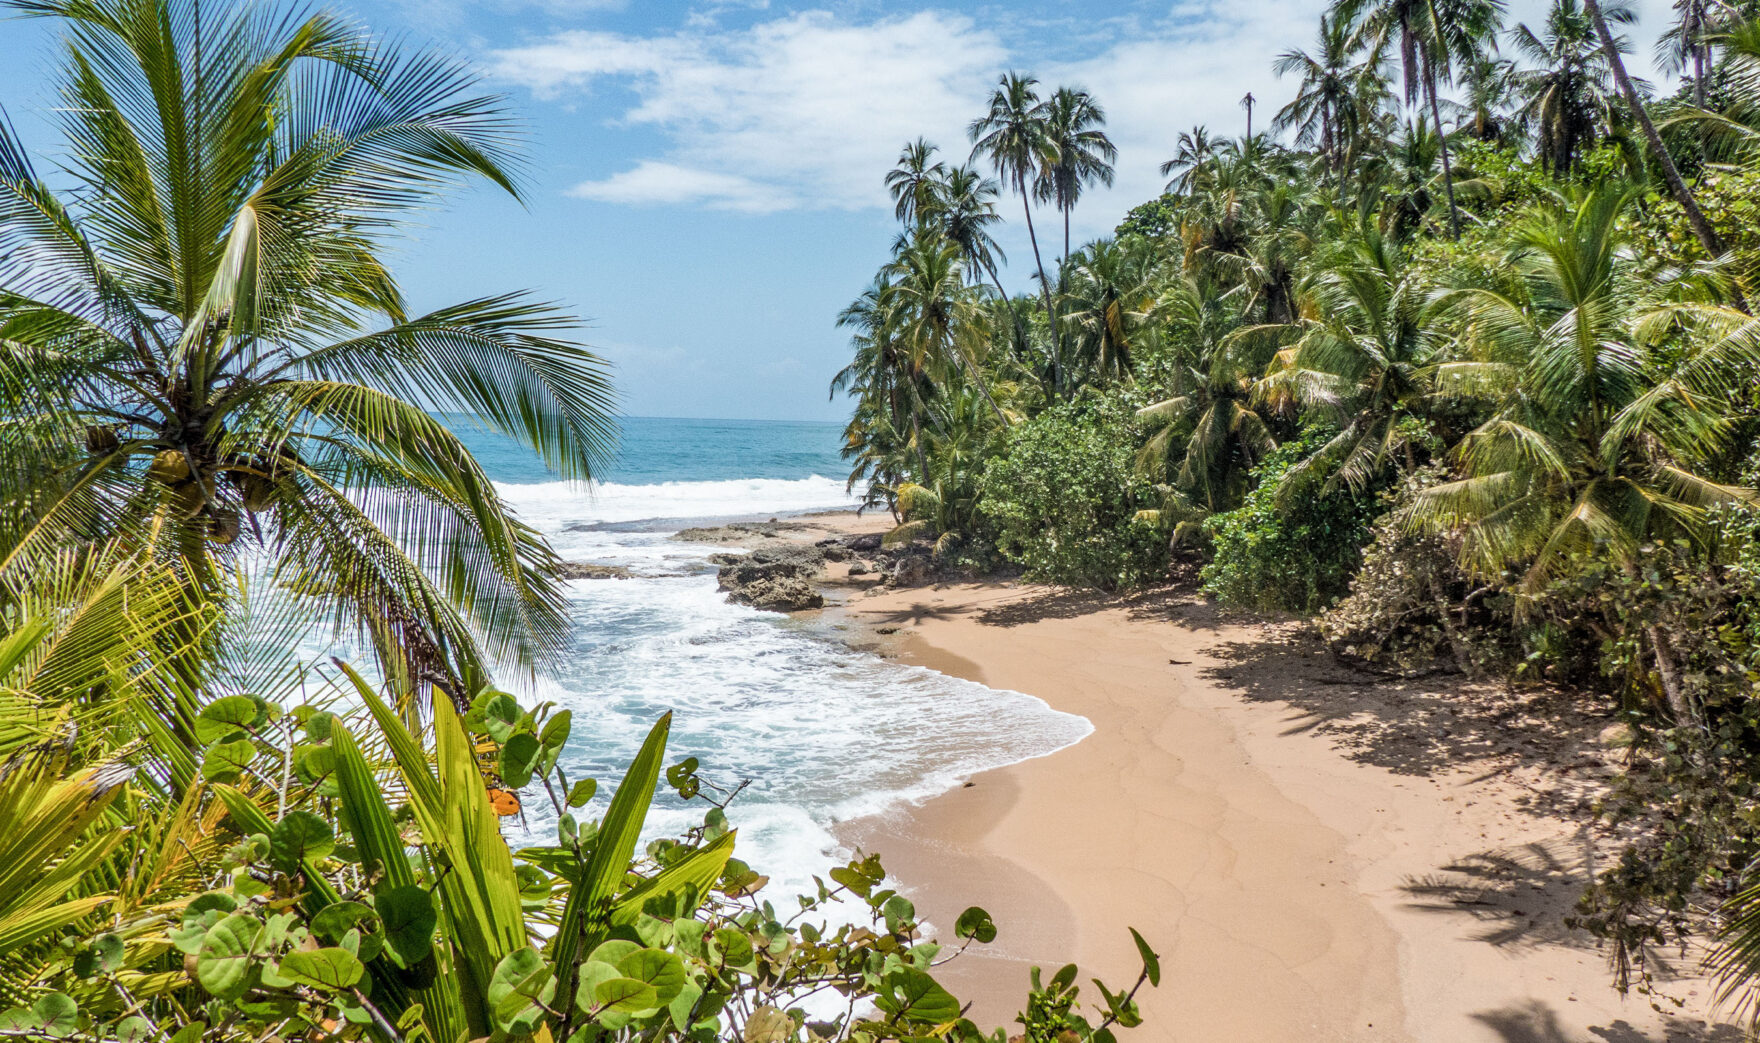 Costa Rica – from one ocean to another